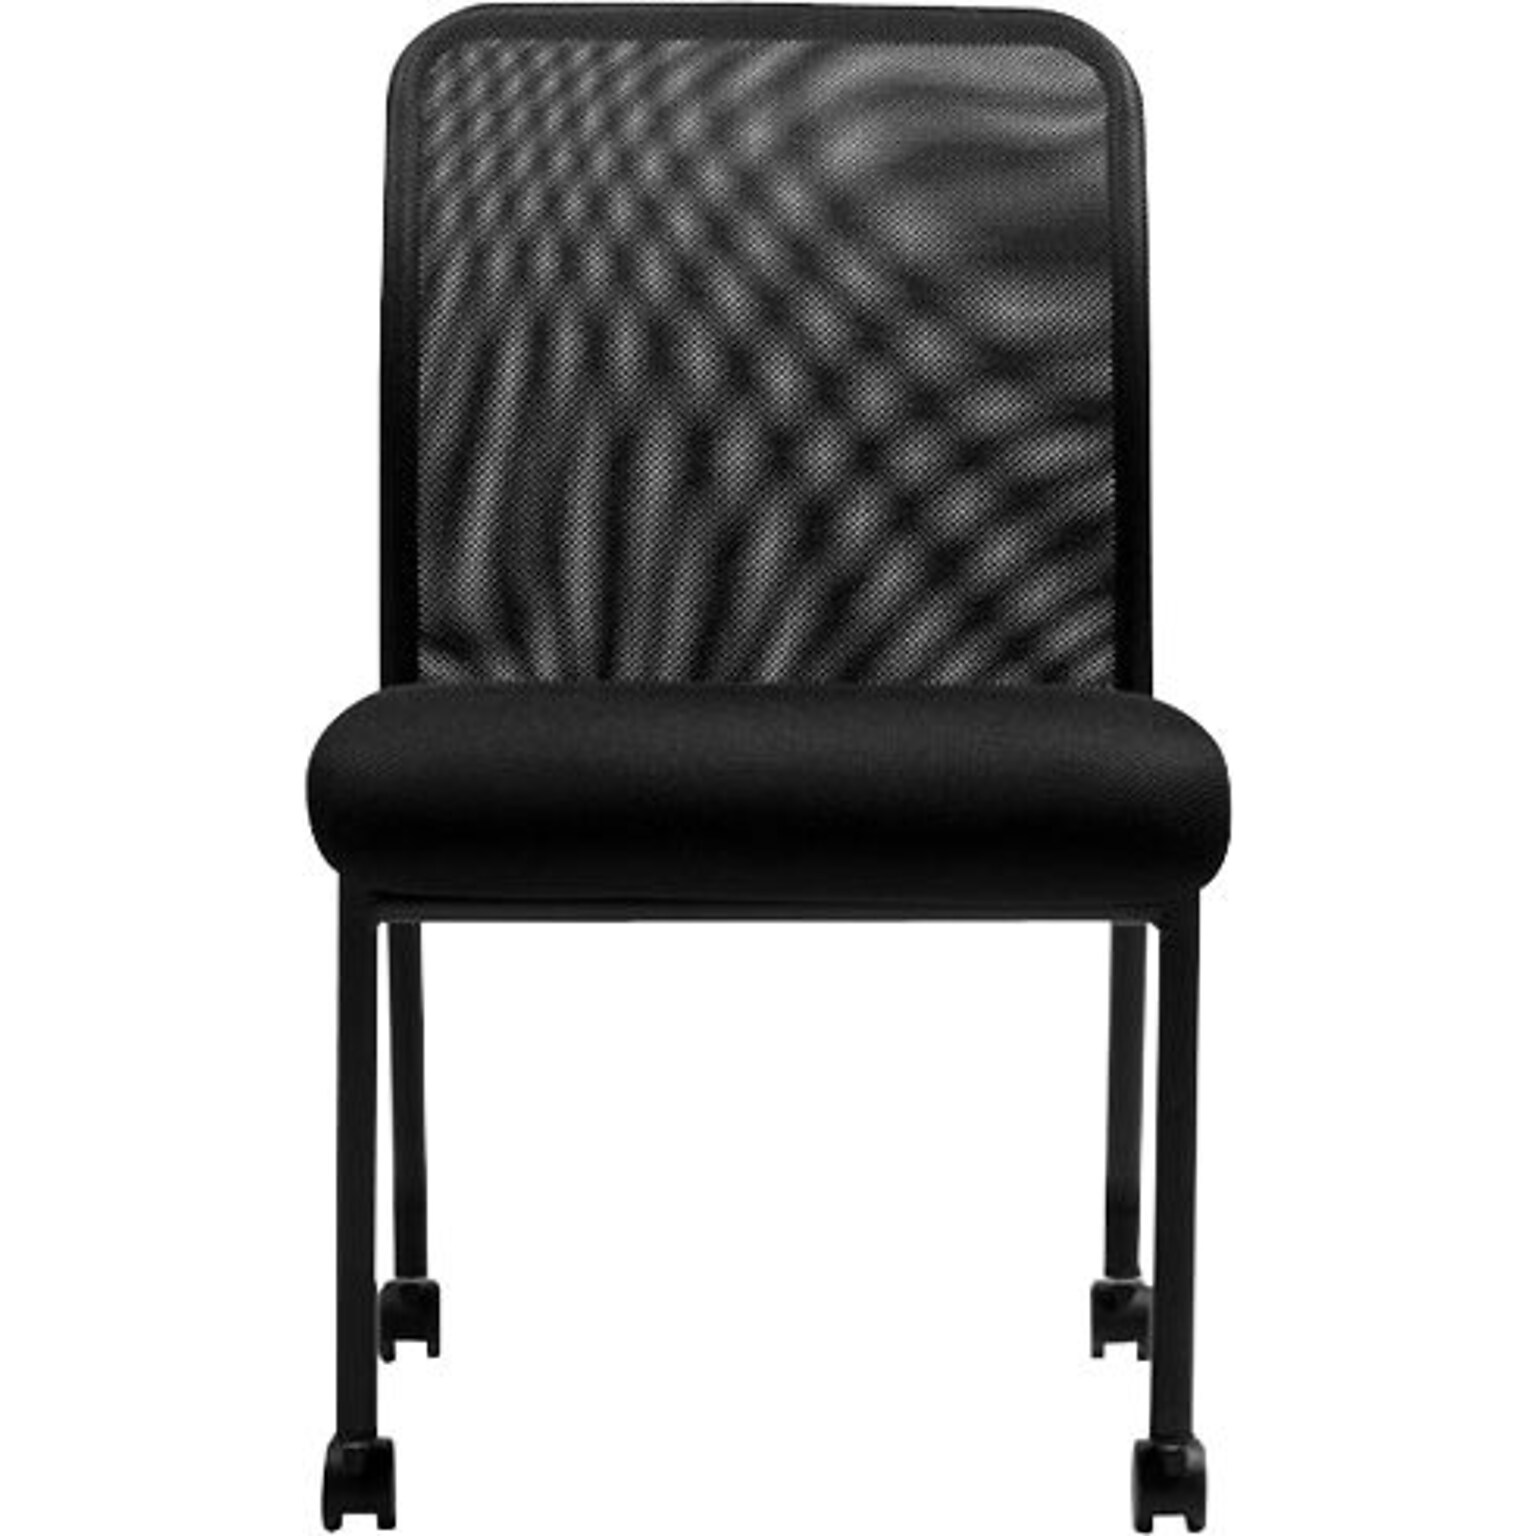 Offices To Go Mesh Back Guest Chair, Black (OTG11761B)